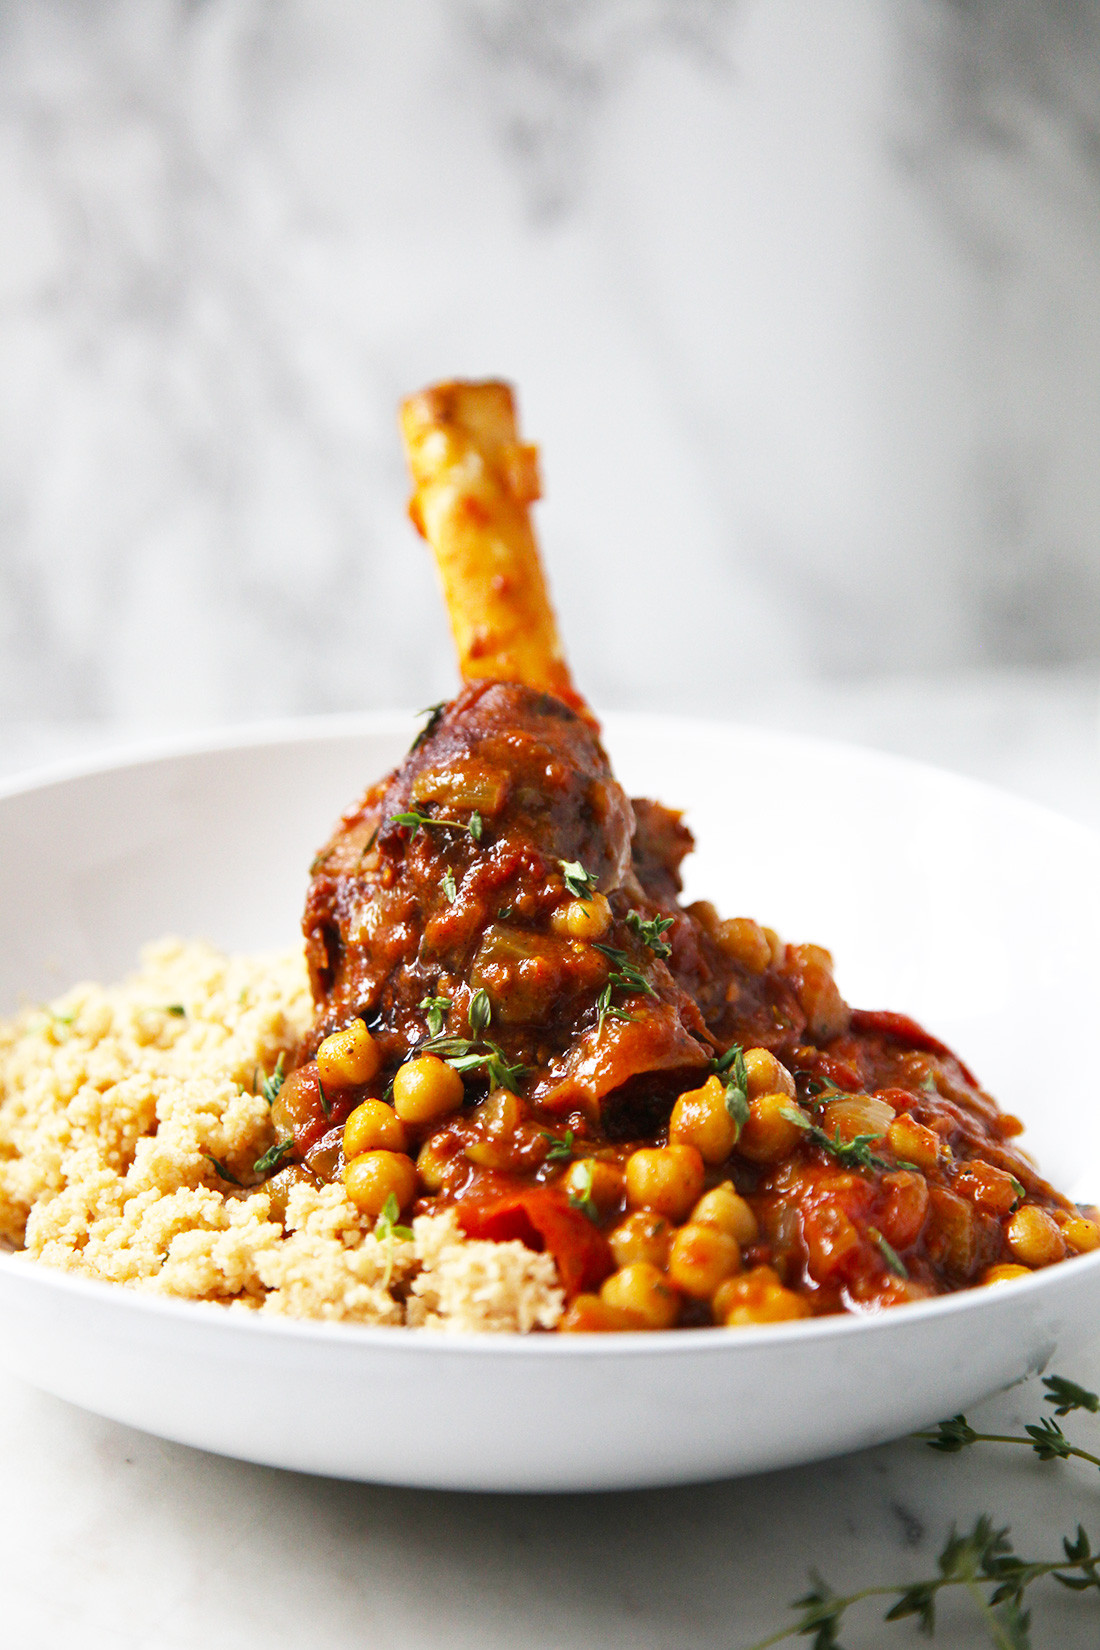 Melt in the mouth lamb shanks with chickpeas, tomatoes and thyme